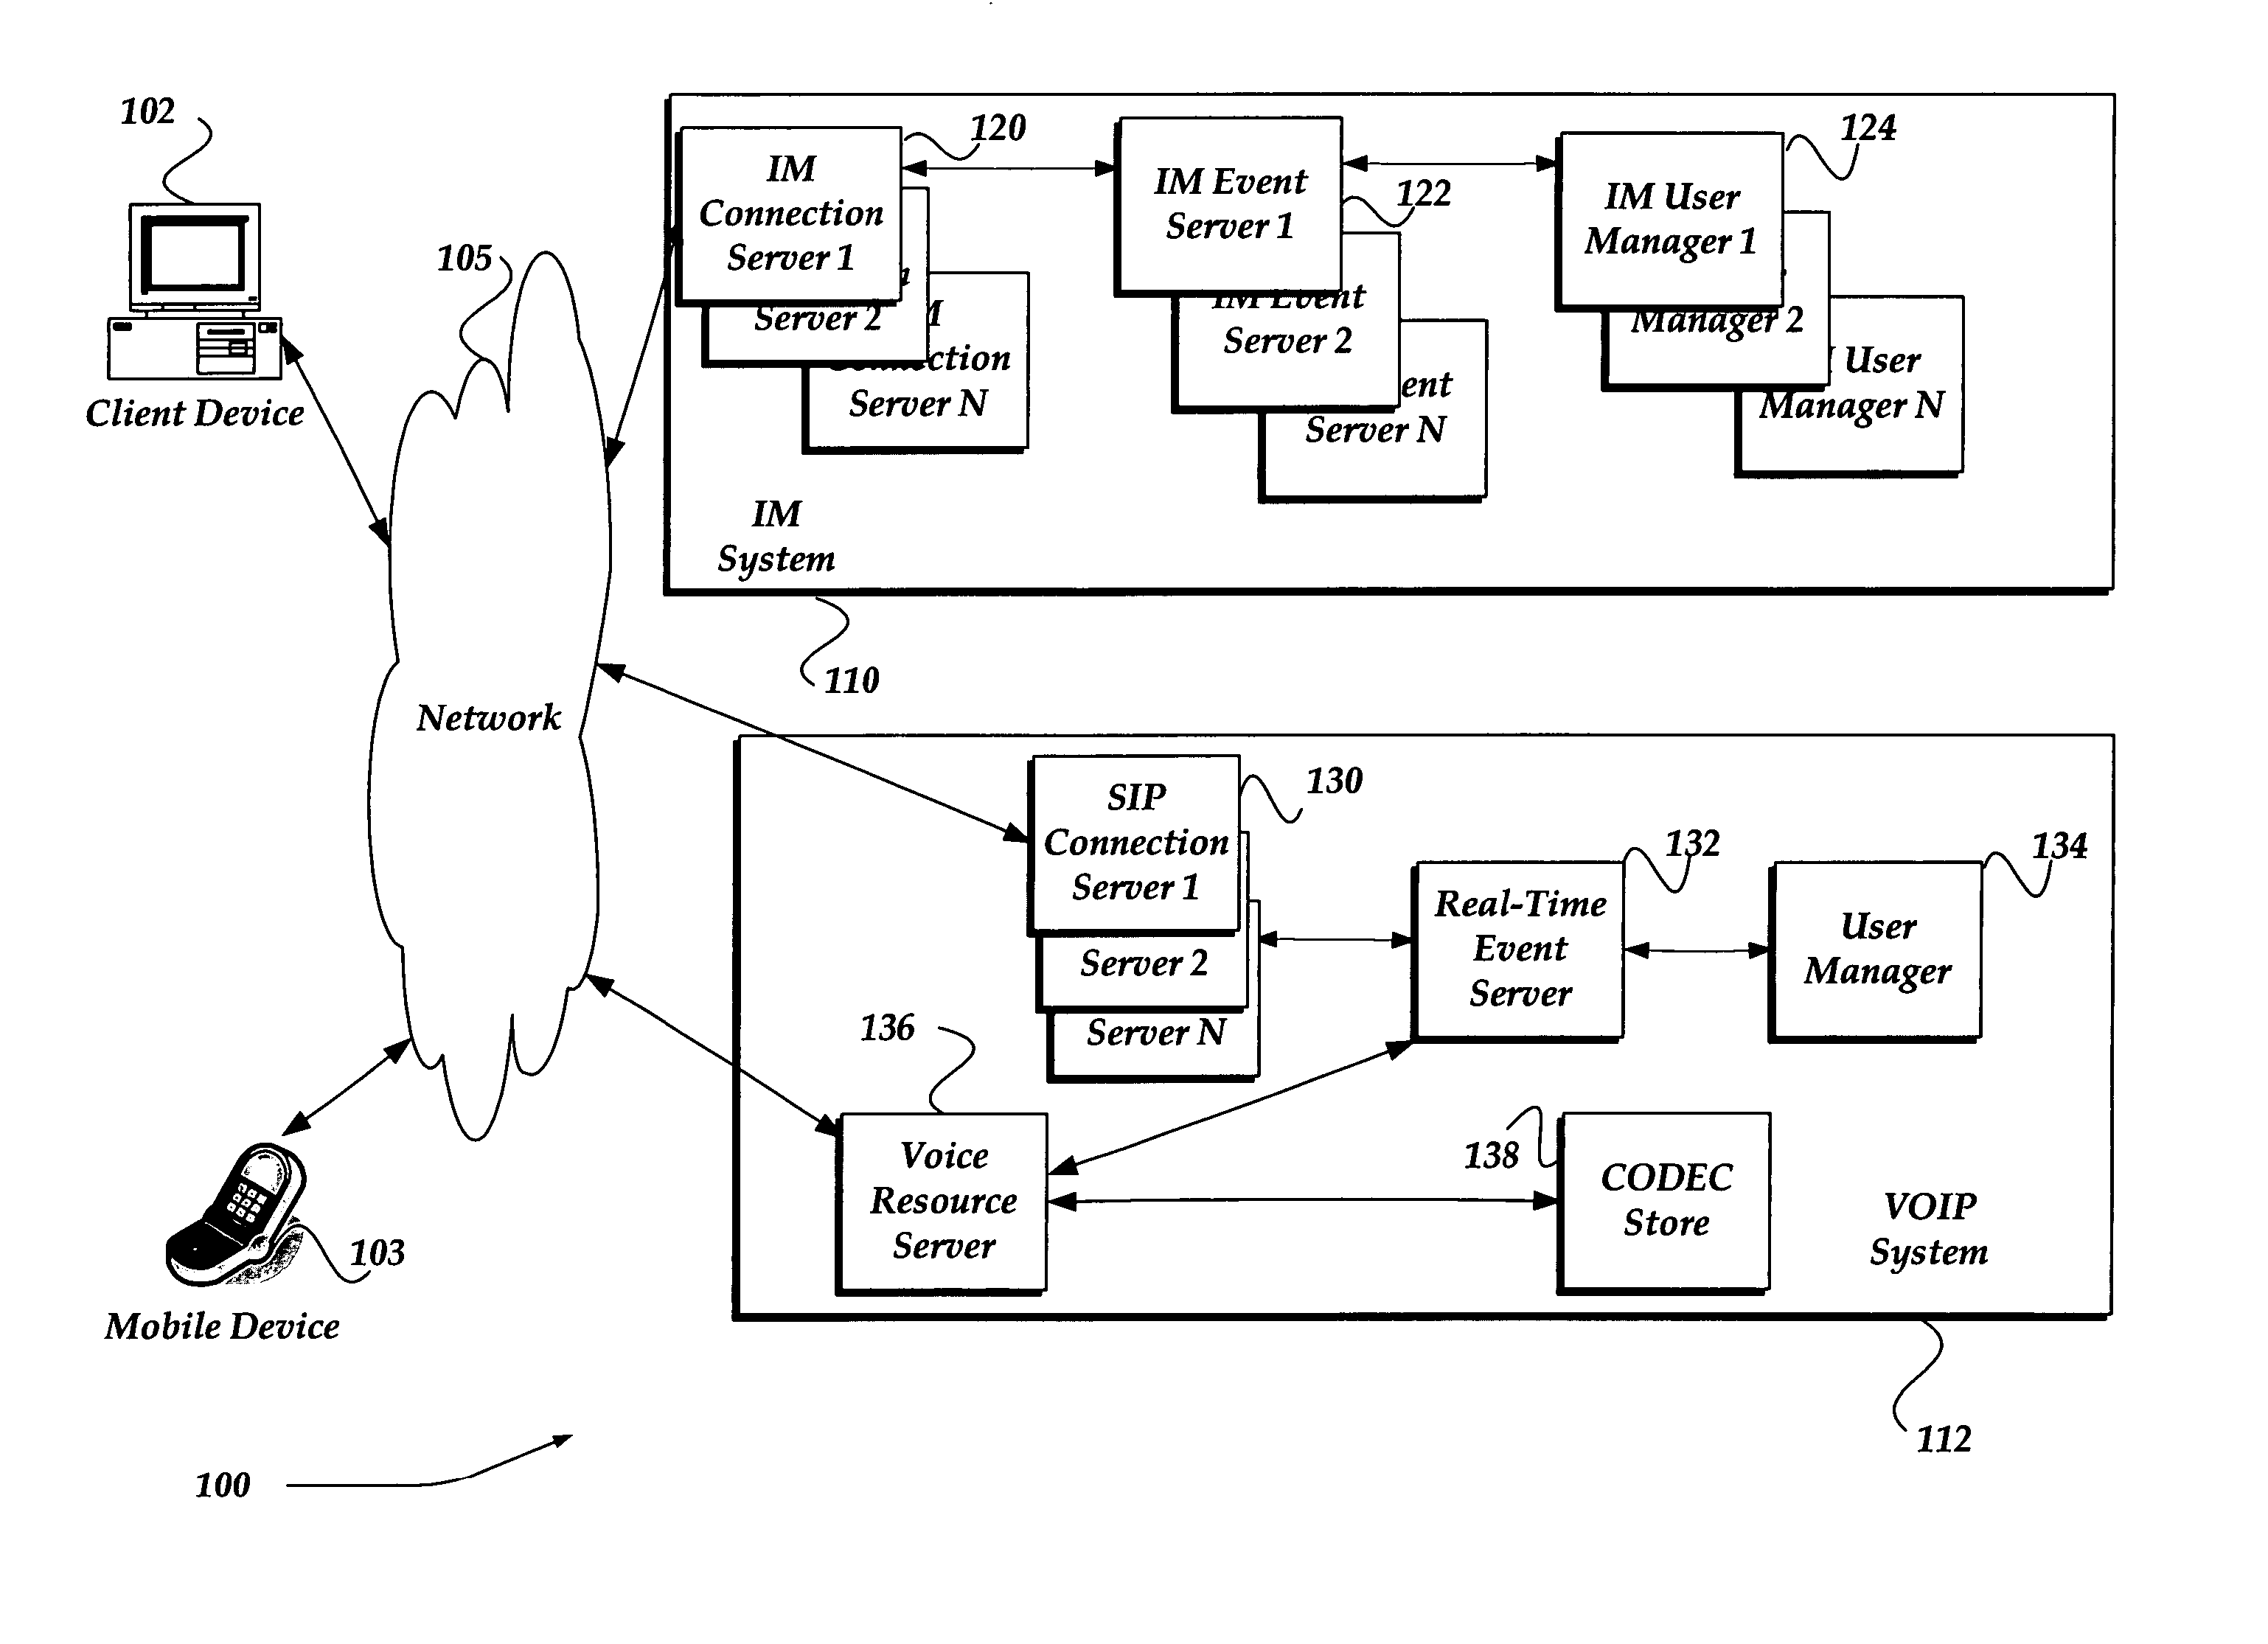 Dynamically selecting CODECS for managing an audio message